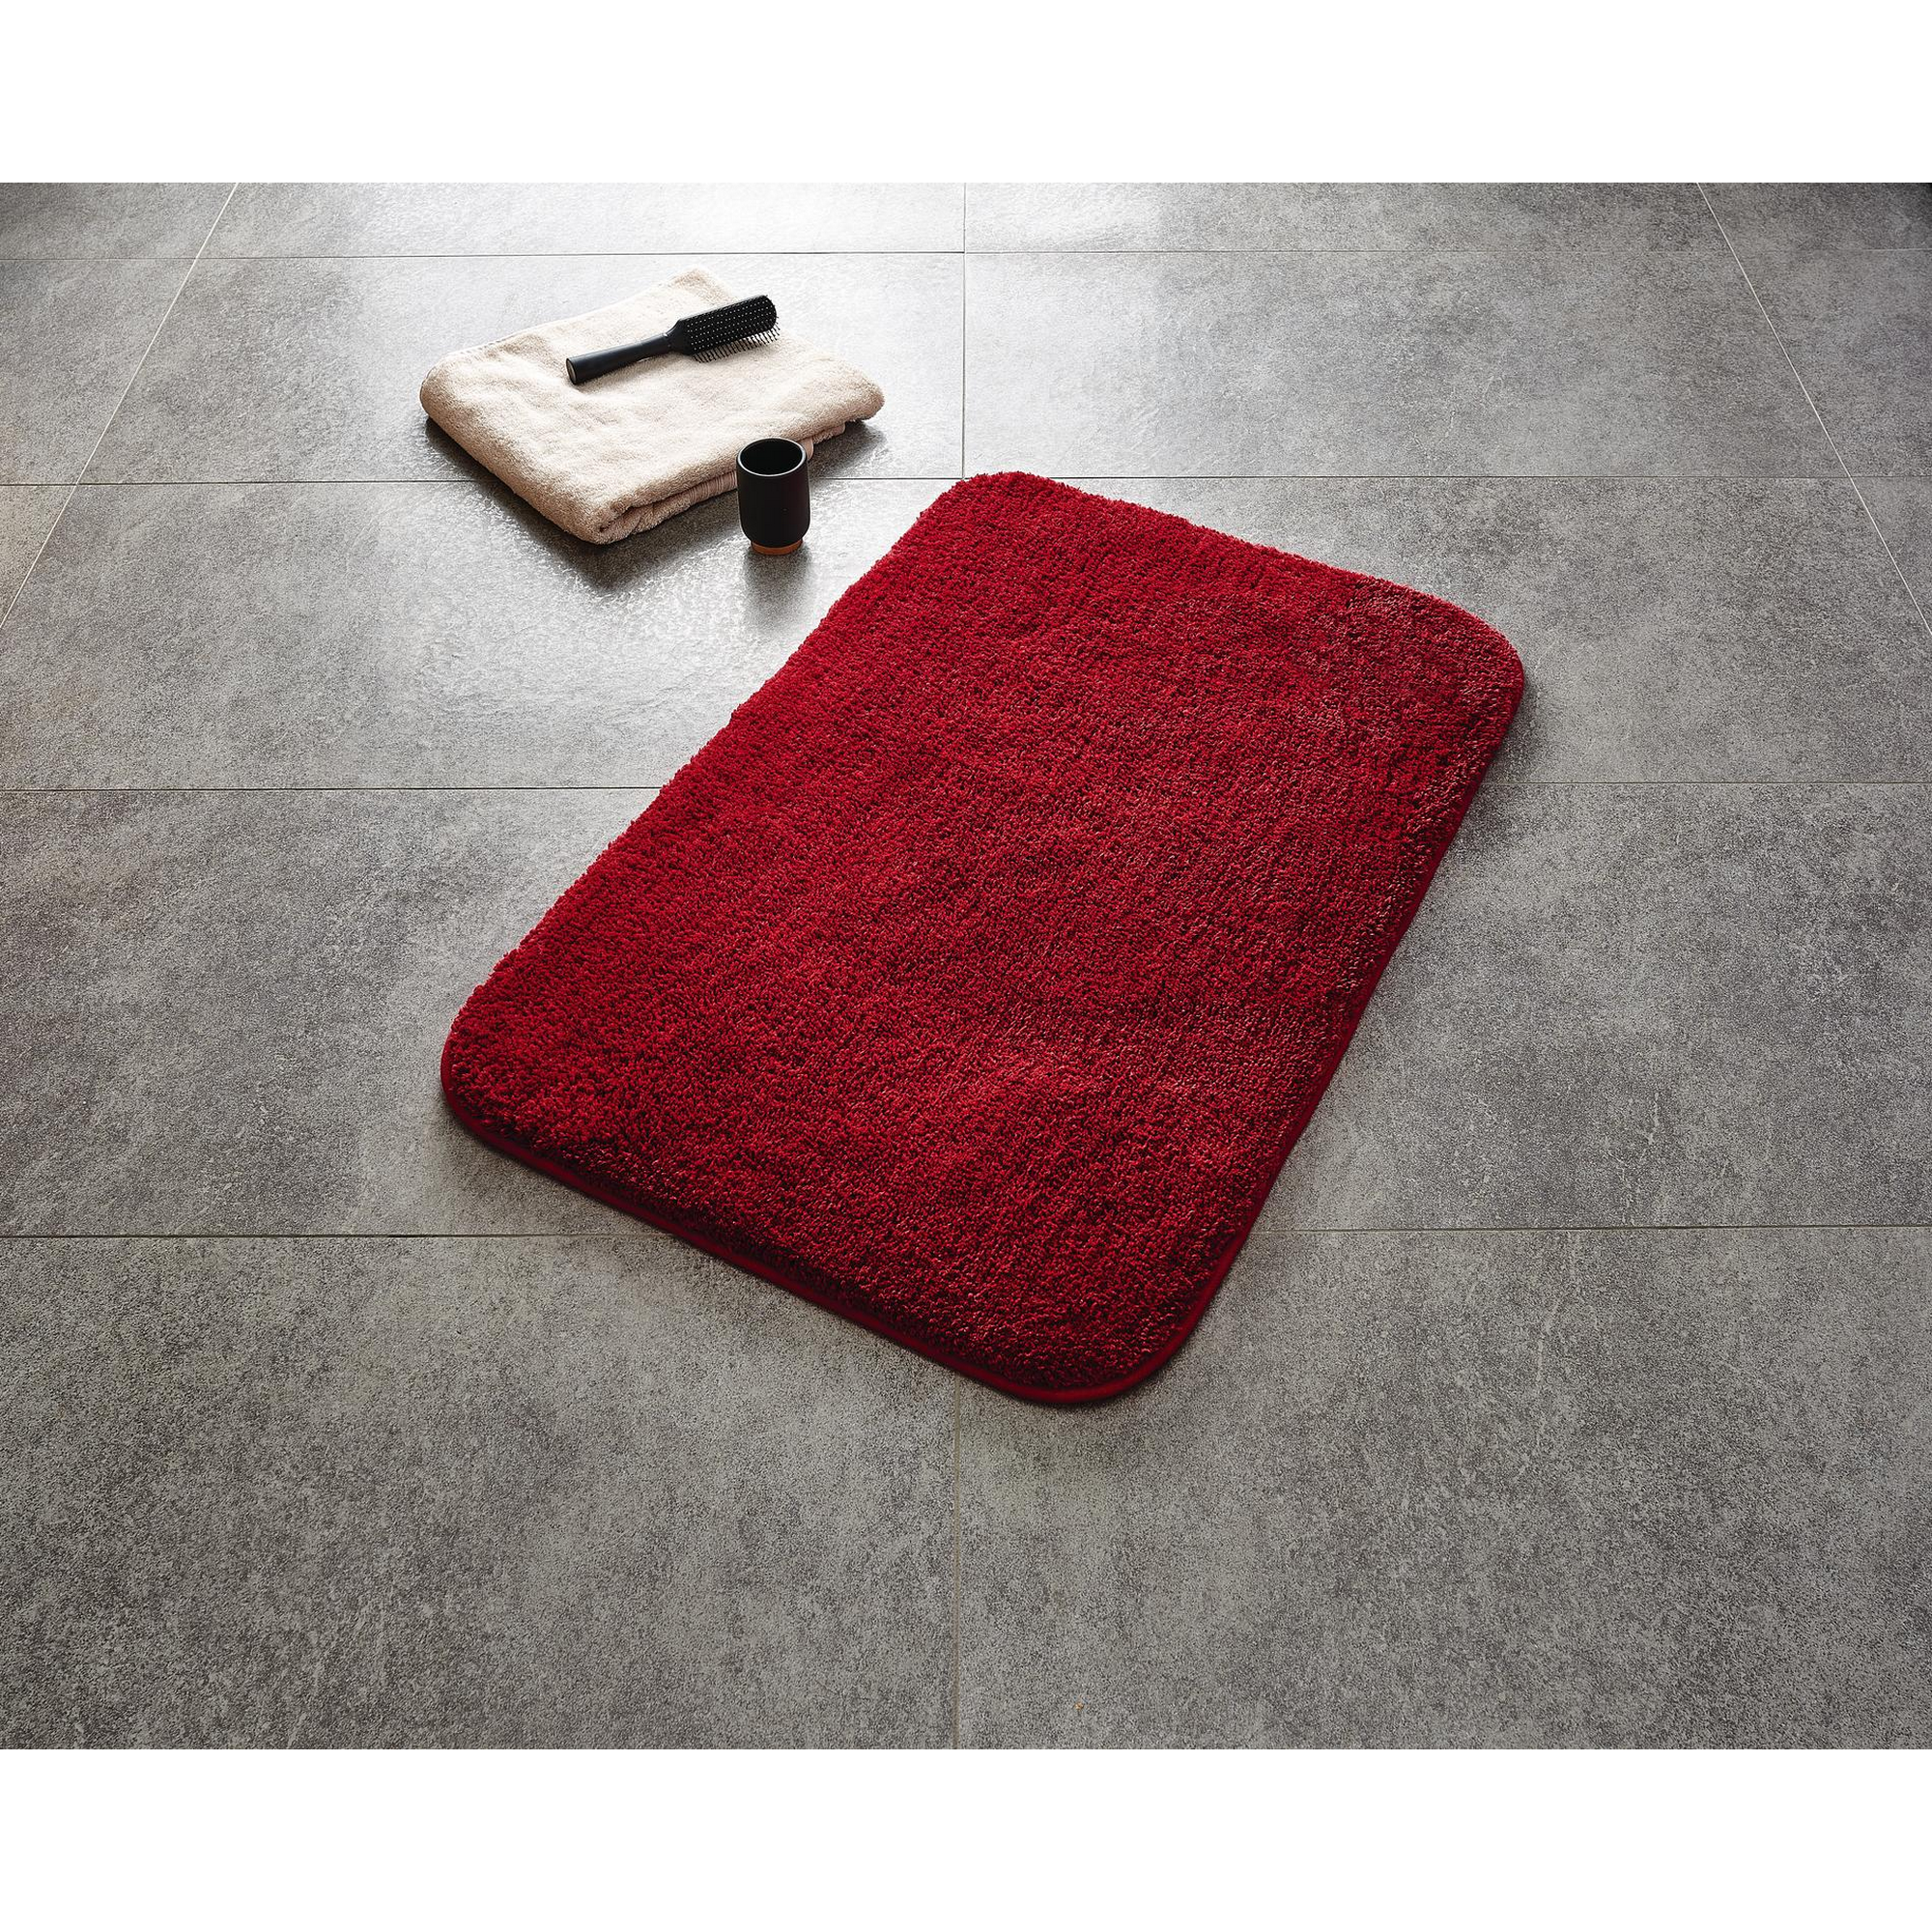 Badteppich 'Chic' Microfaser rot 60 x 90 cm + product picture